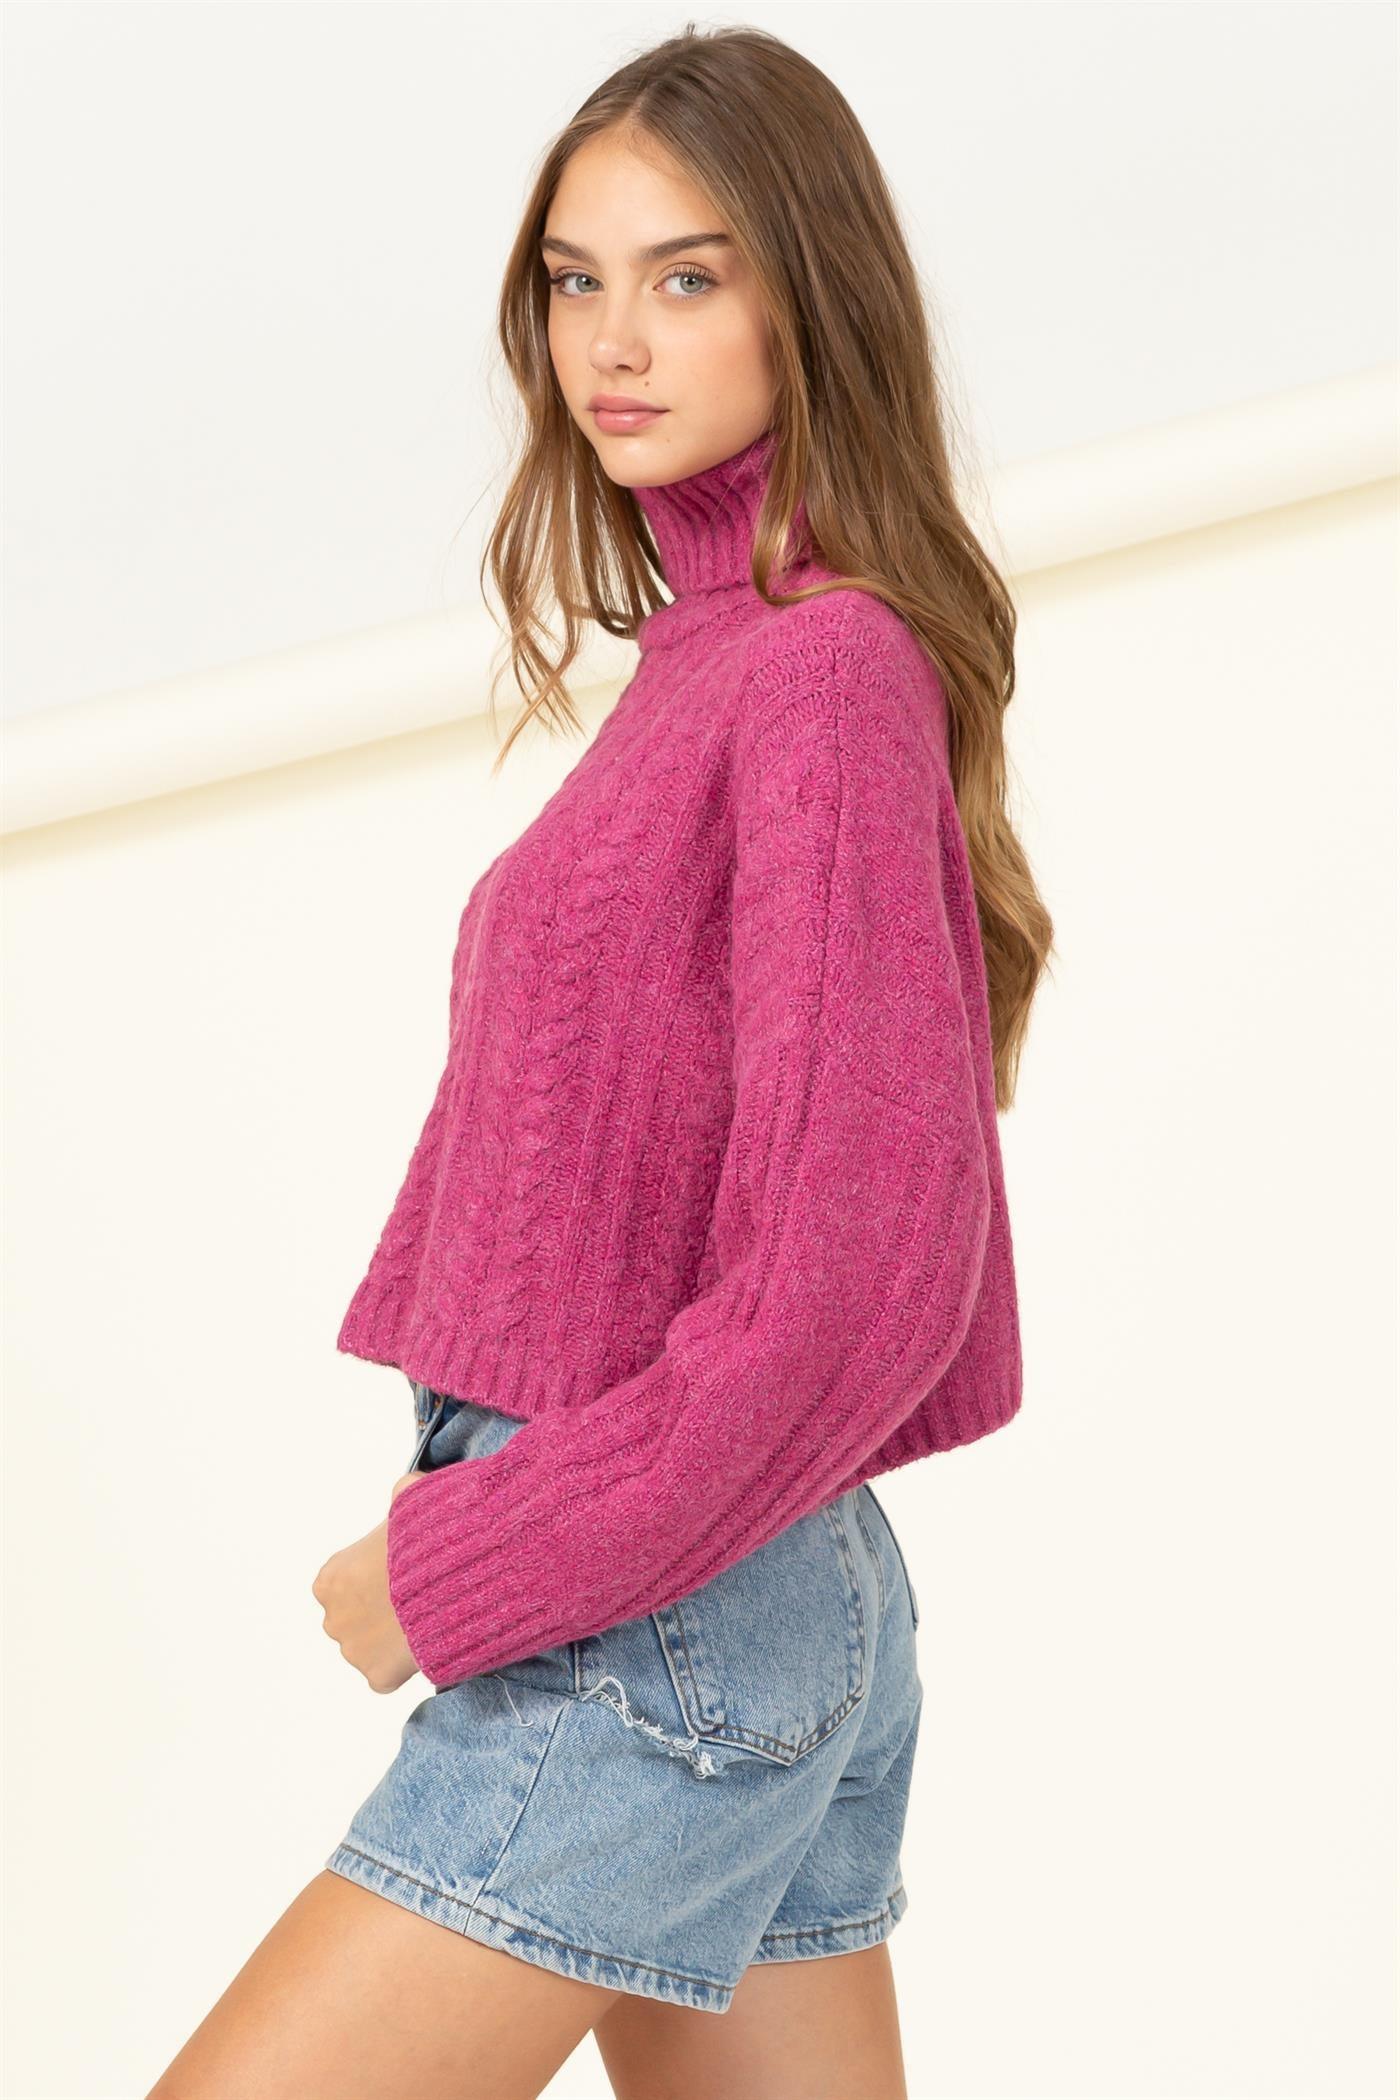 turtleneck box crop sweater - RK Collections Boutique